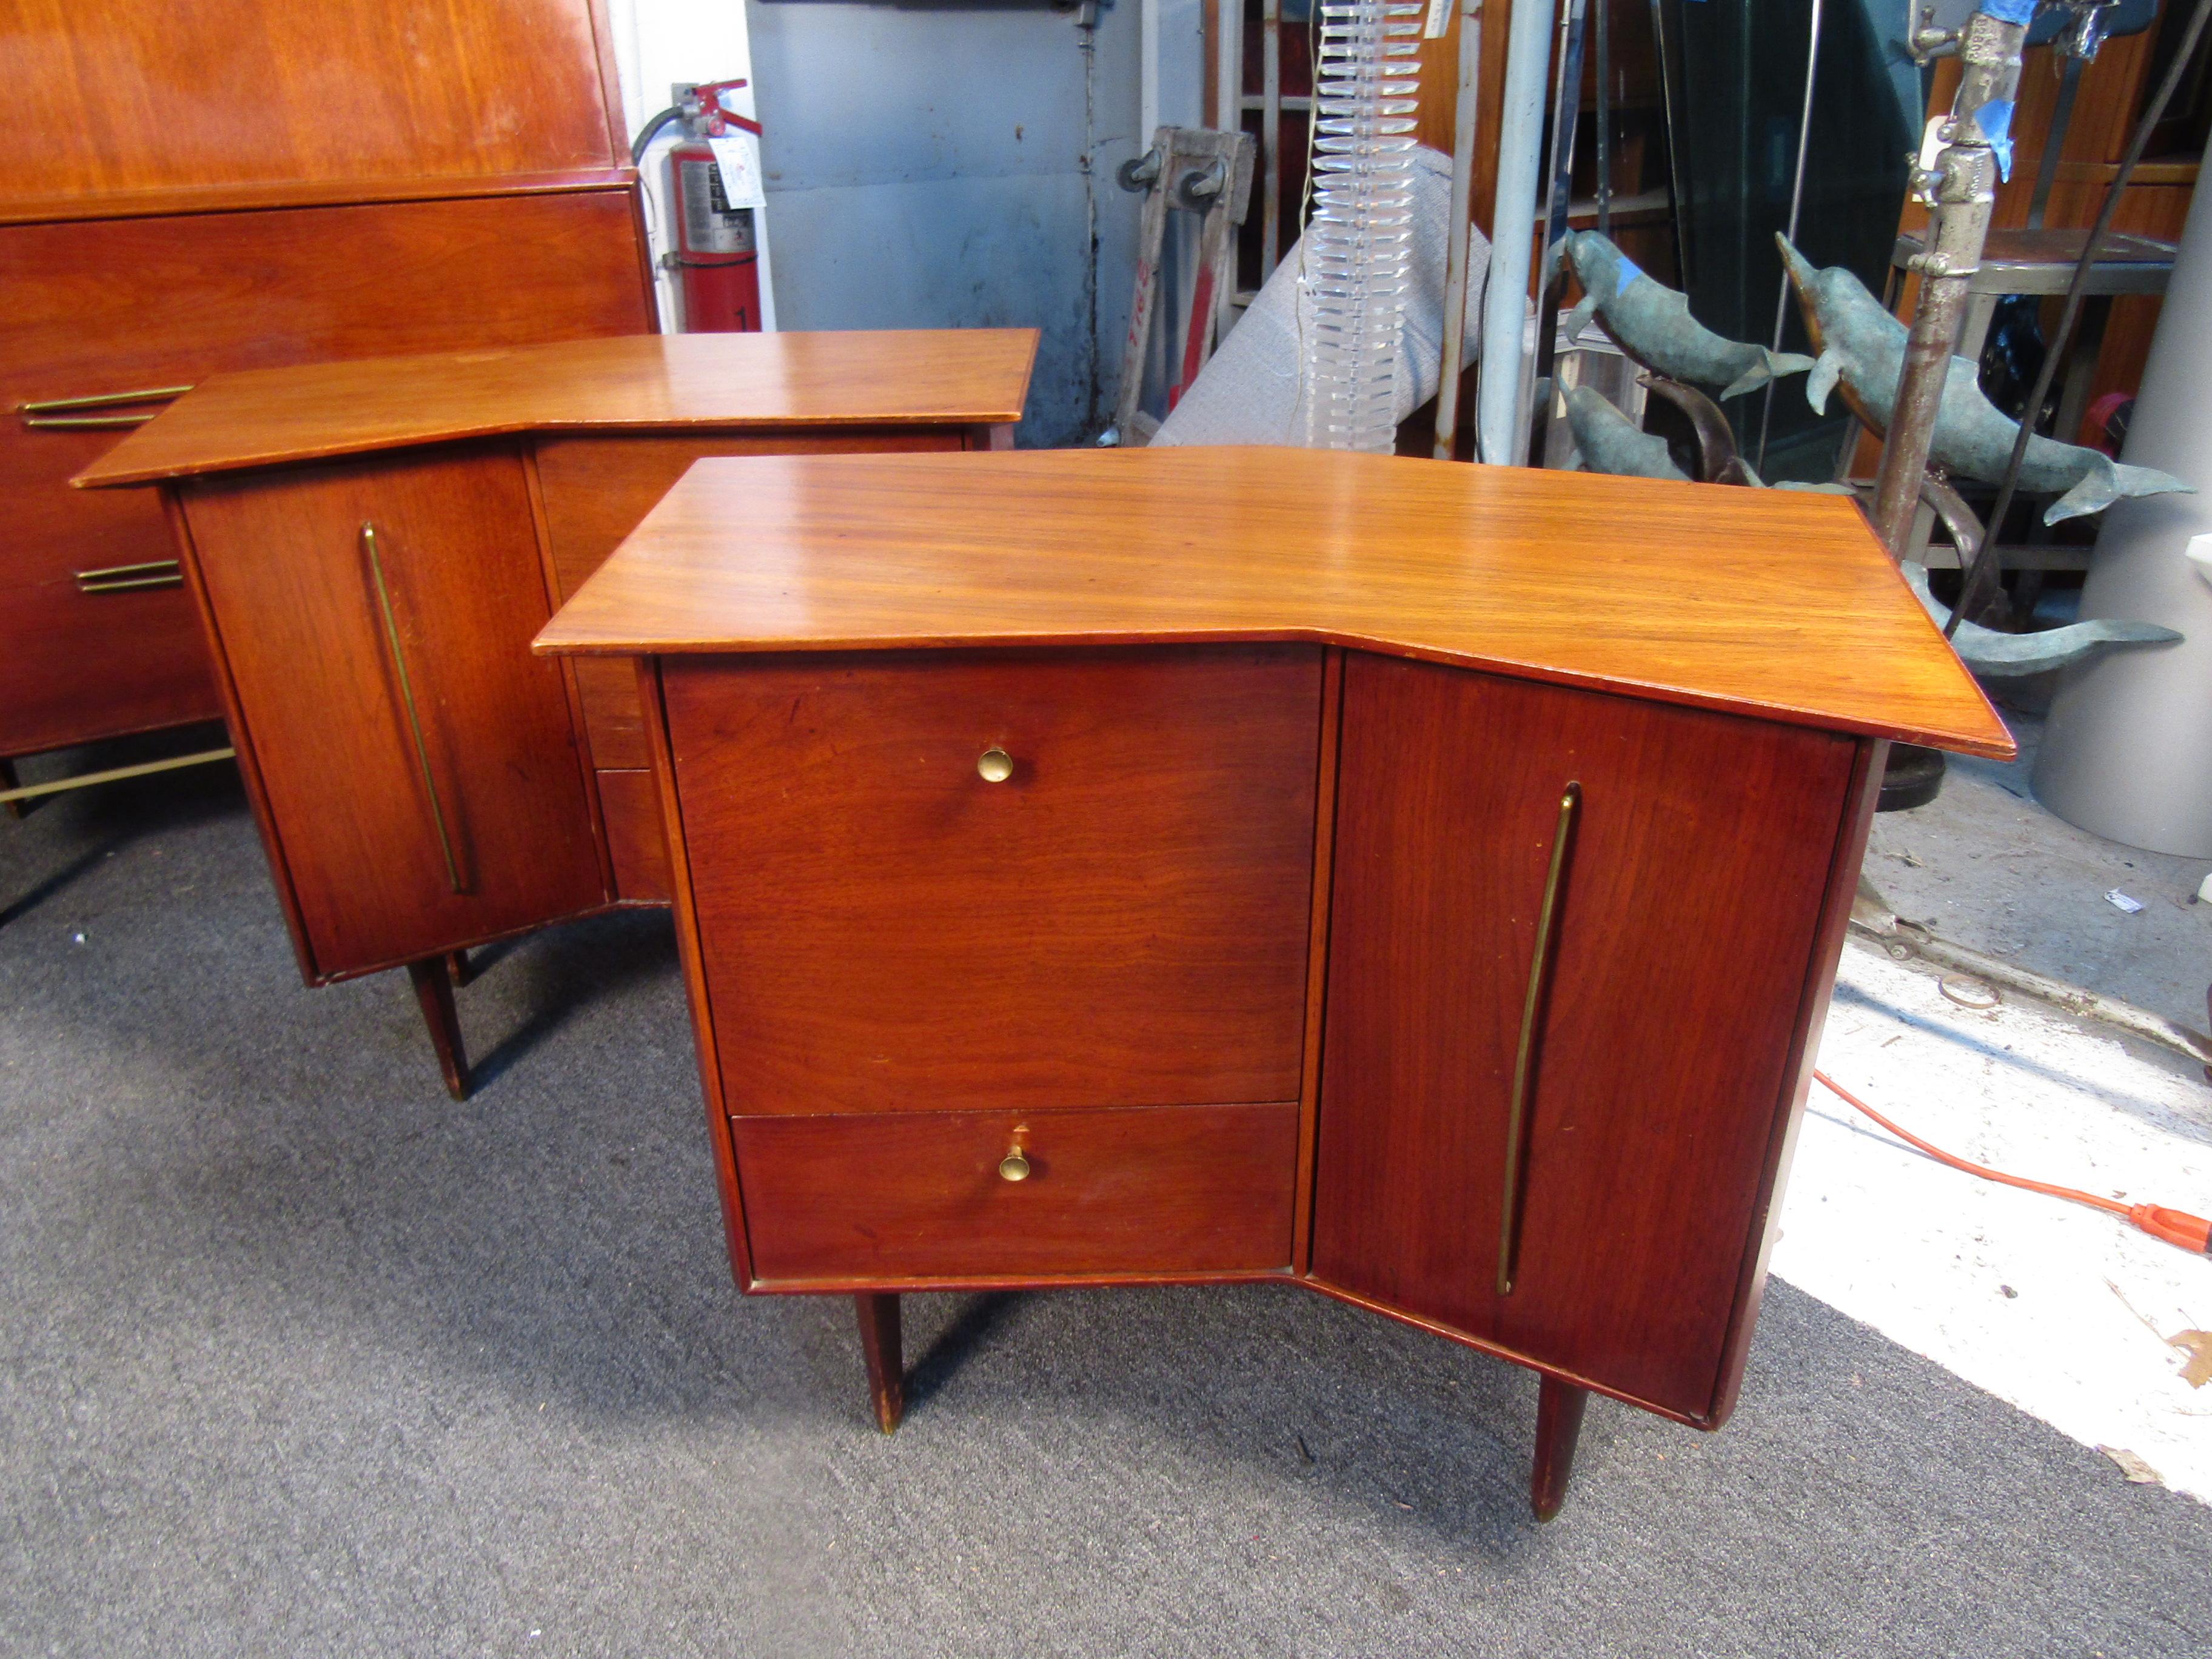 Perfect for adding a cohesive Mid-Century Modern theme to any bedroom, this vintage set by Baker-Levett includes a pair of nightstands, a low dresser, high dresser, mirror, and headboard.

Dimensions:
Night Stands; 30